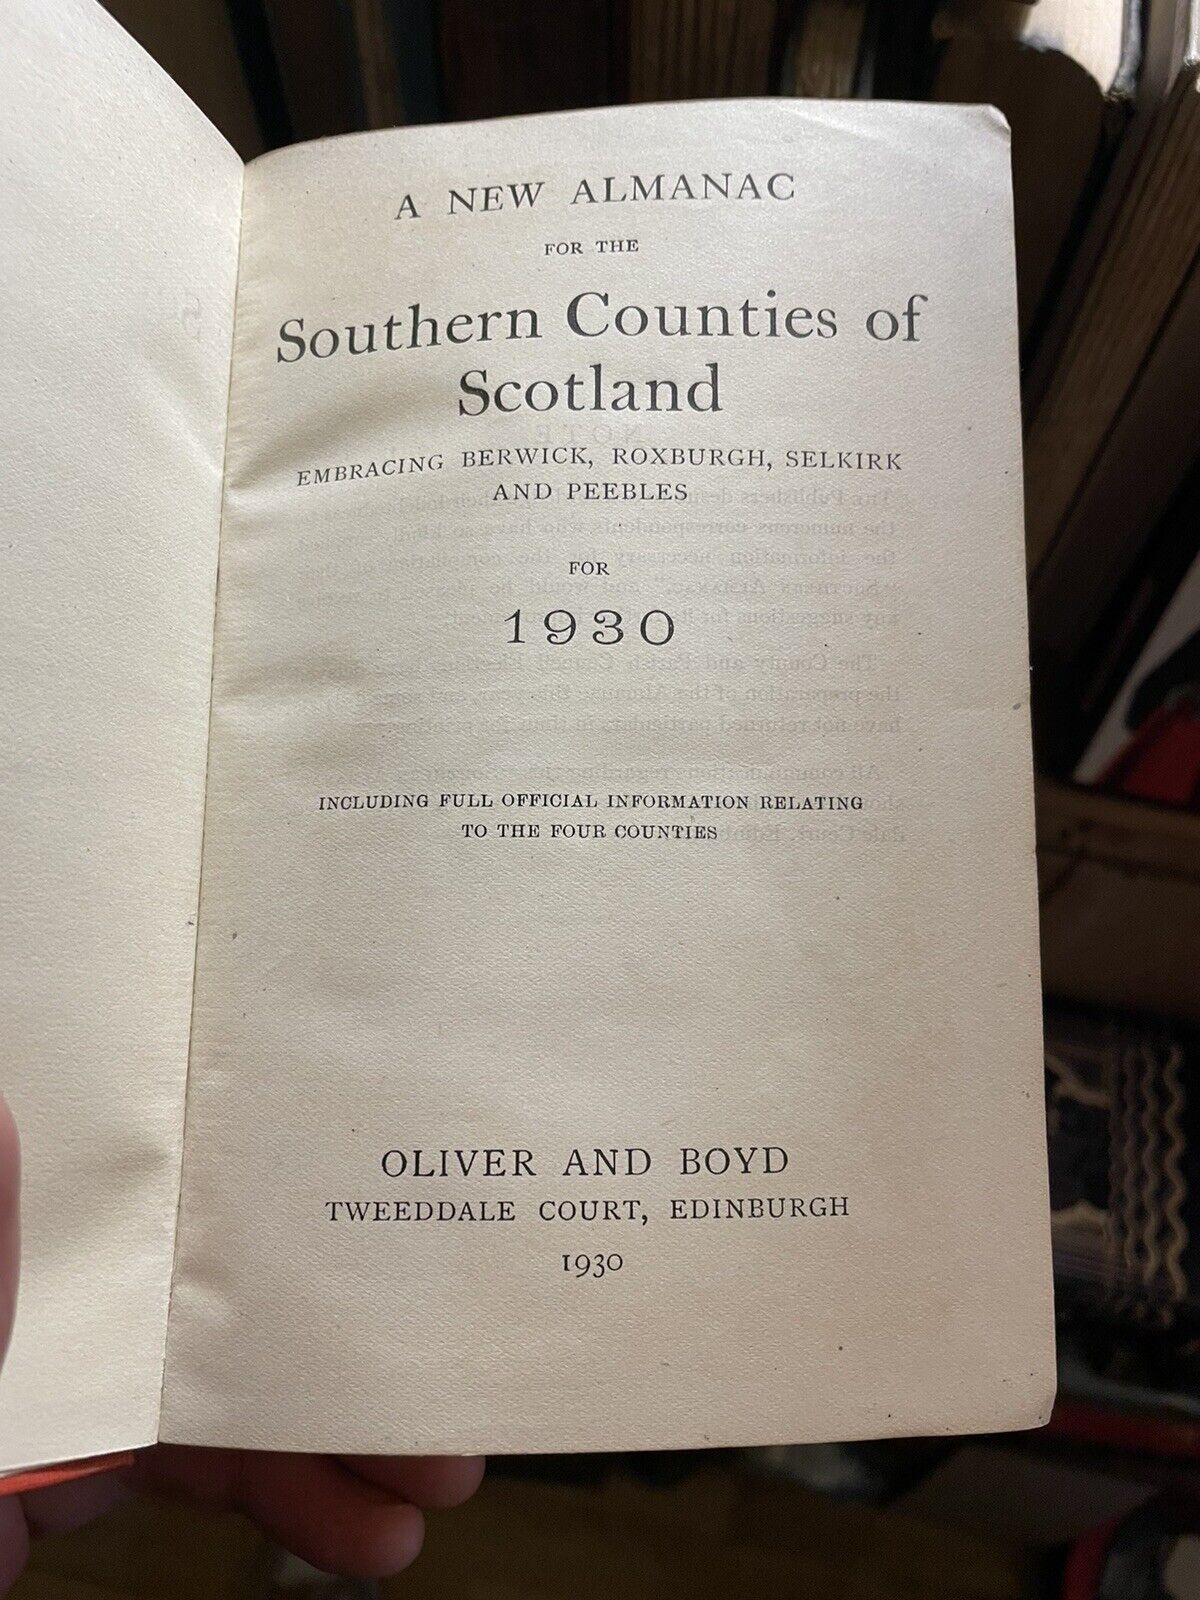 A New Almanac for the Southern Counties of Scotland for 1930